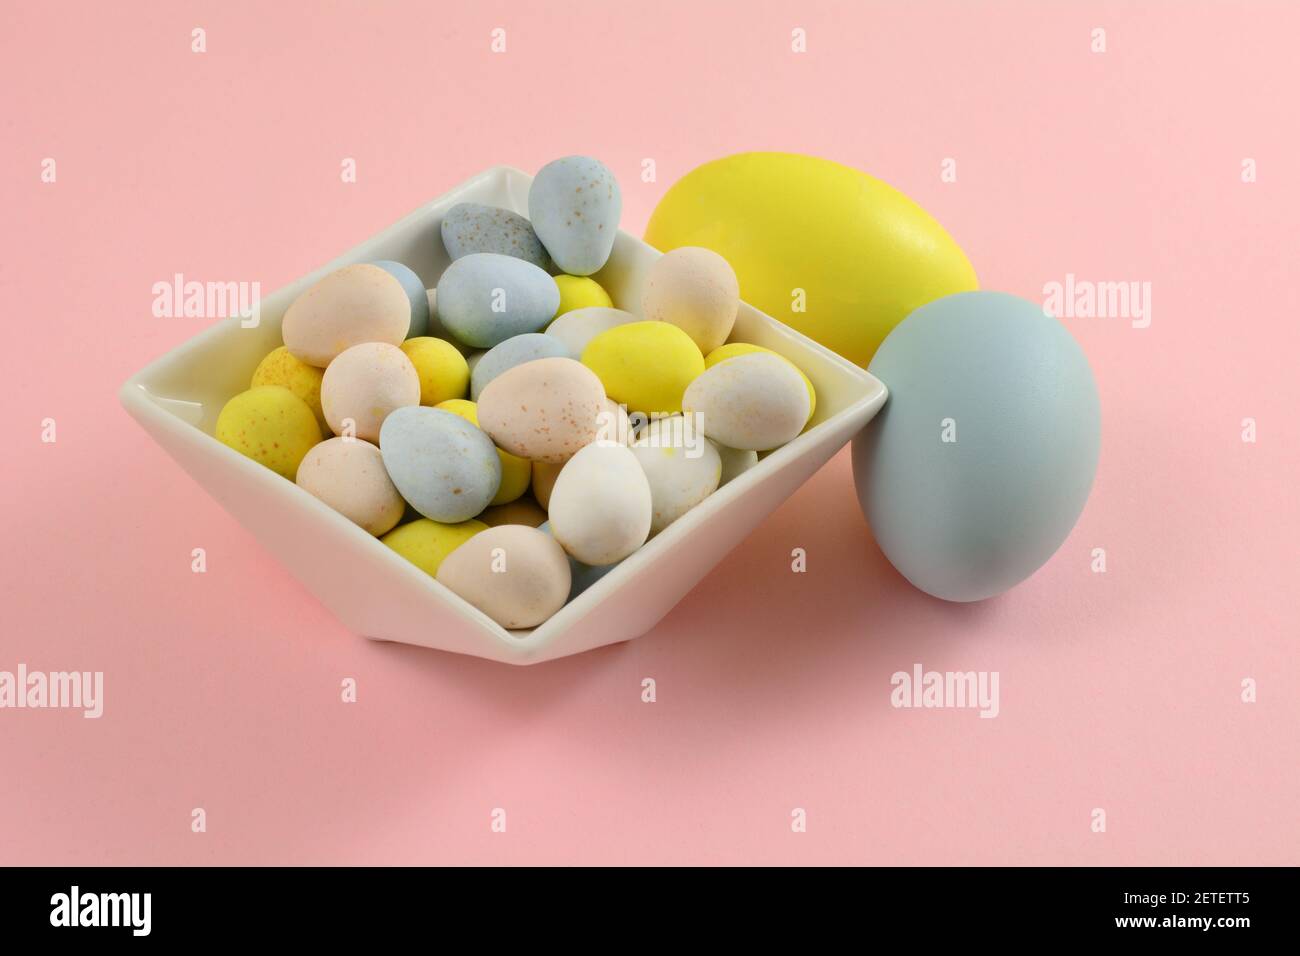 Pastel colored candy Easter eggs in white dessert bowl with two painted Easter eggs on pink background Stock Photo